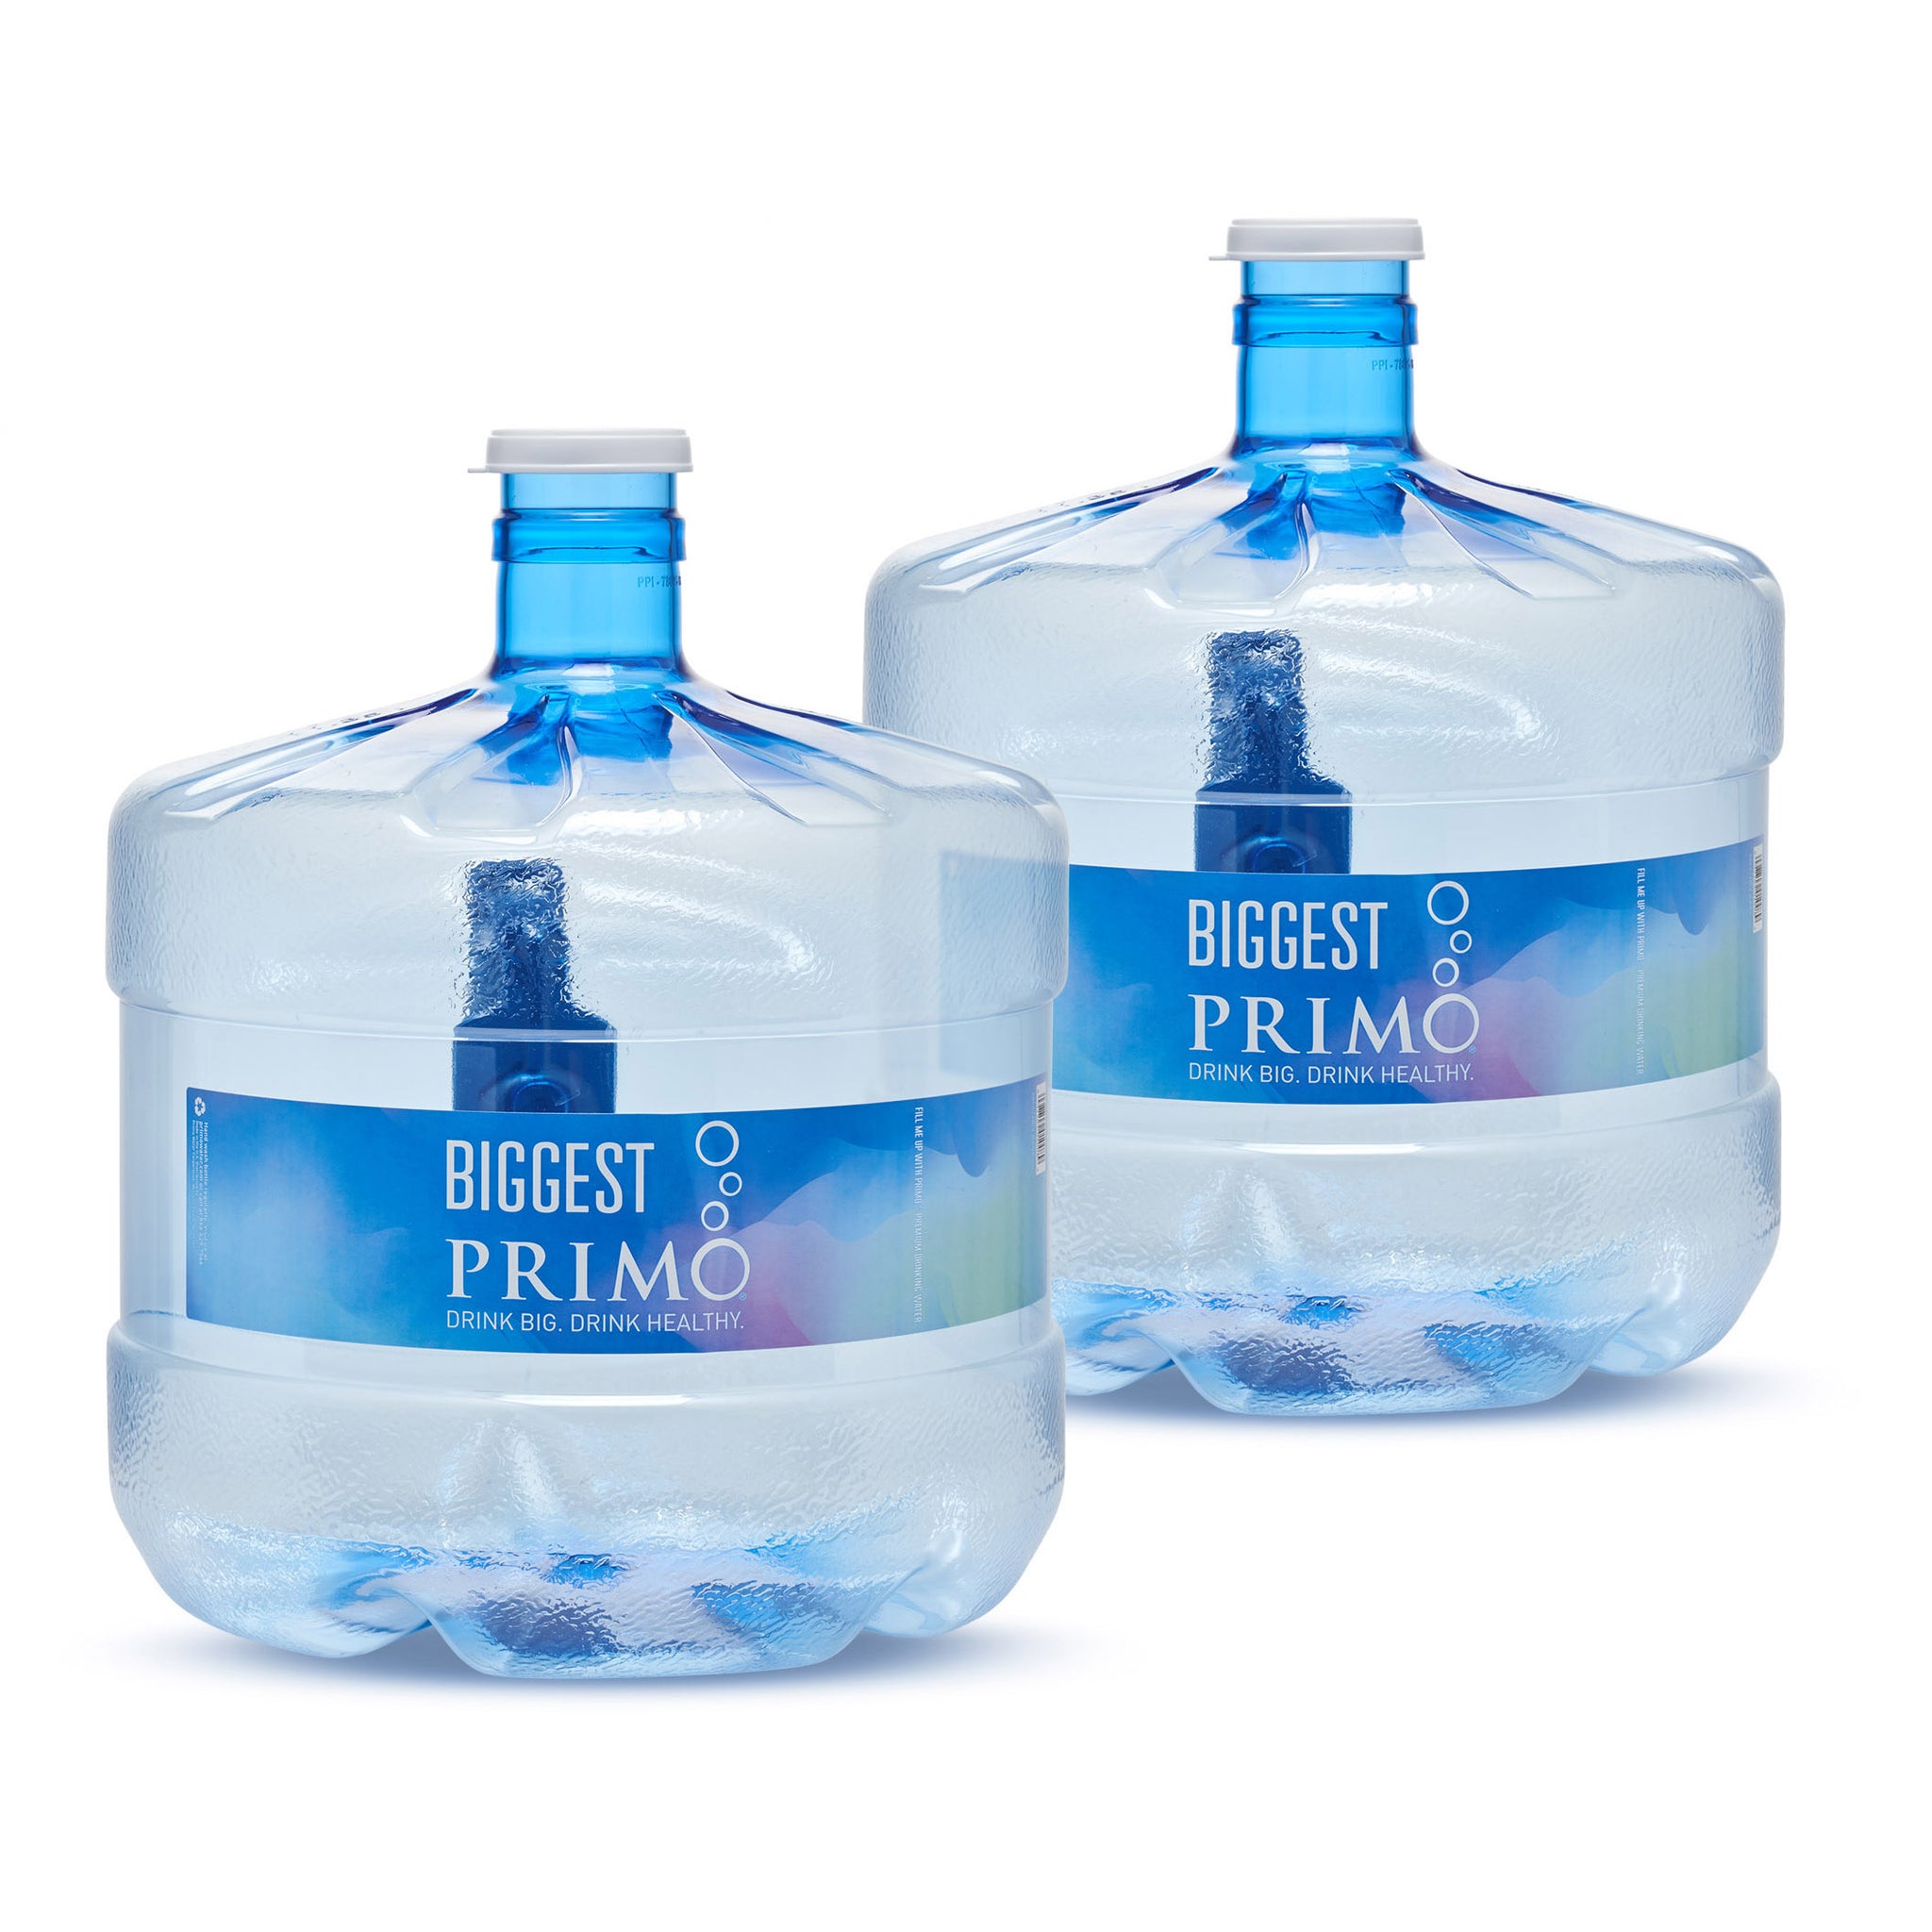 empty 5 gallon water bottles for sale